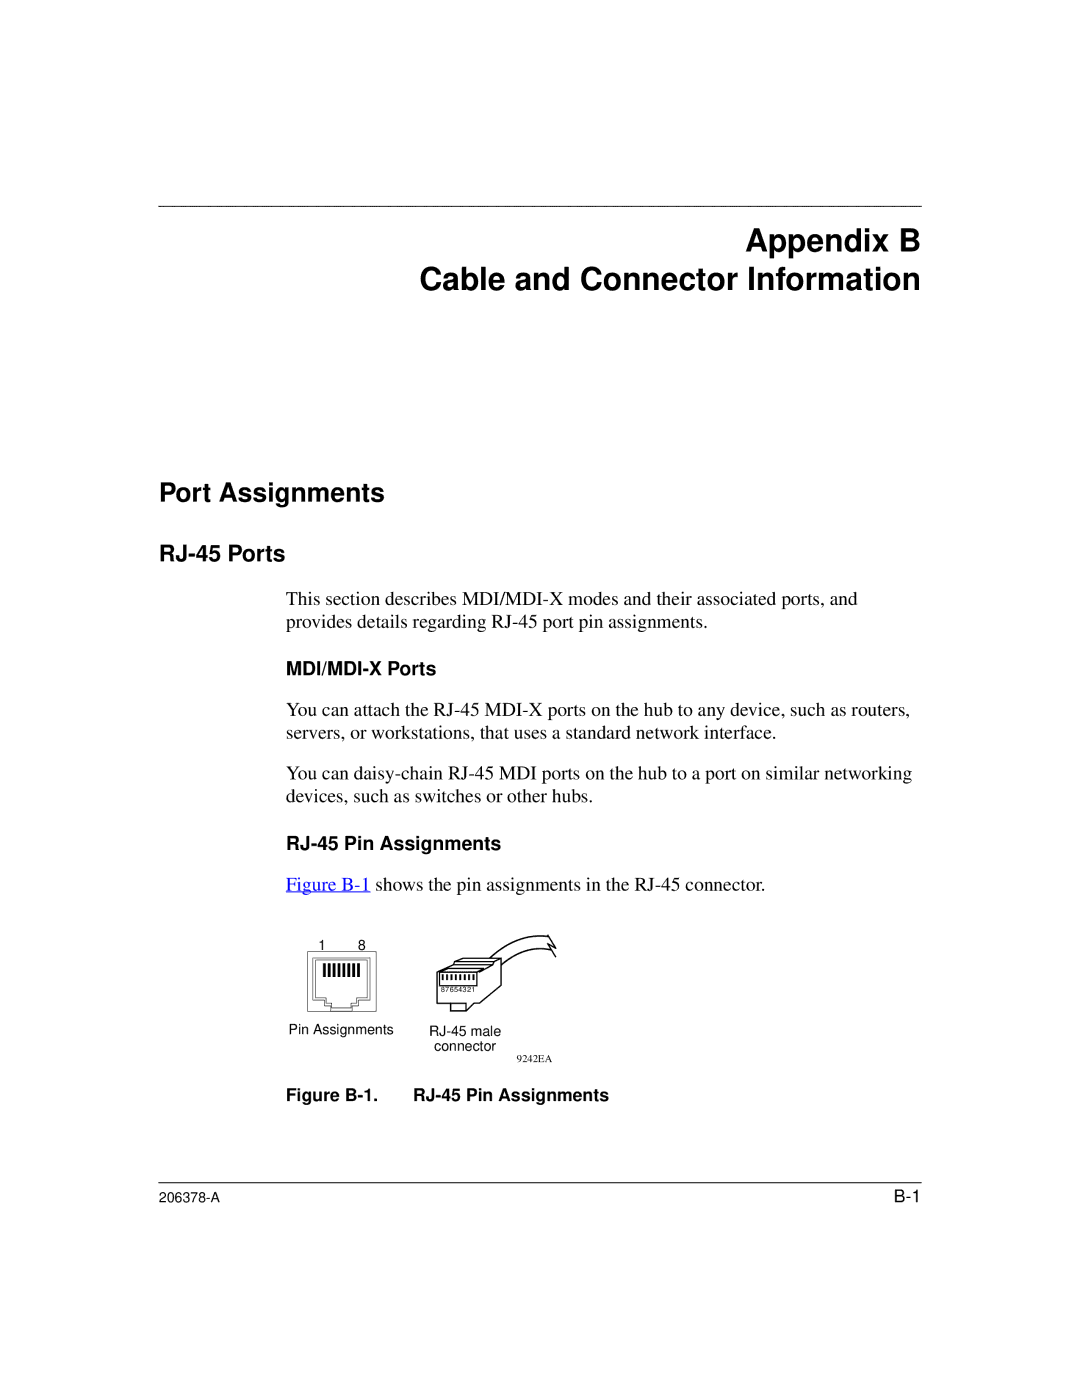 Nortel Networks 60-12T, 60-24T manual Appendix B Cable and Connector Information, Port Assignments, RJ-45 Ports 